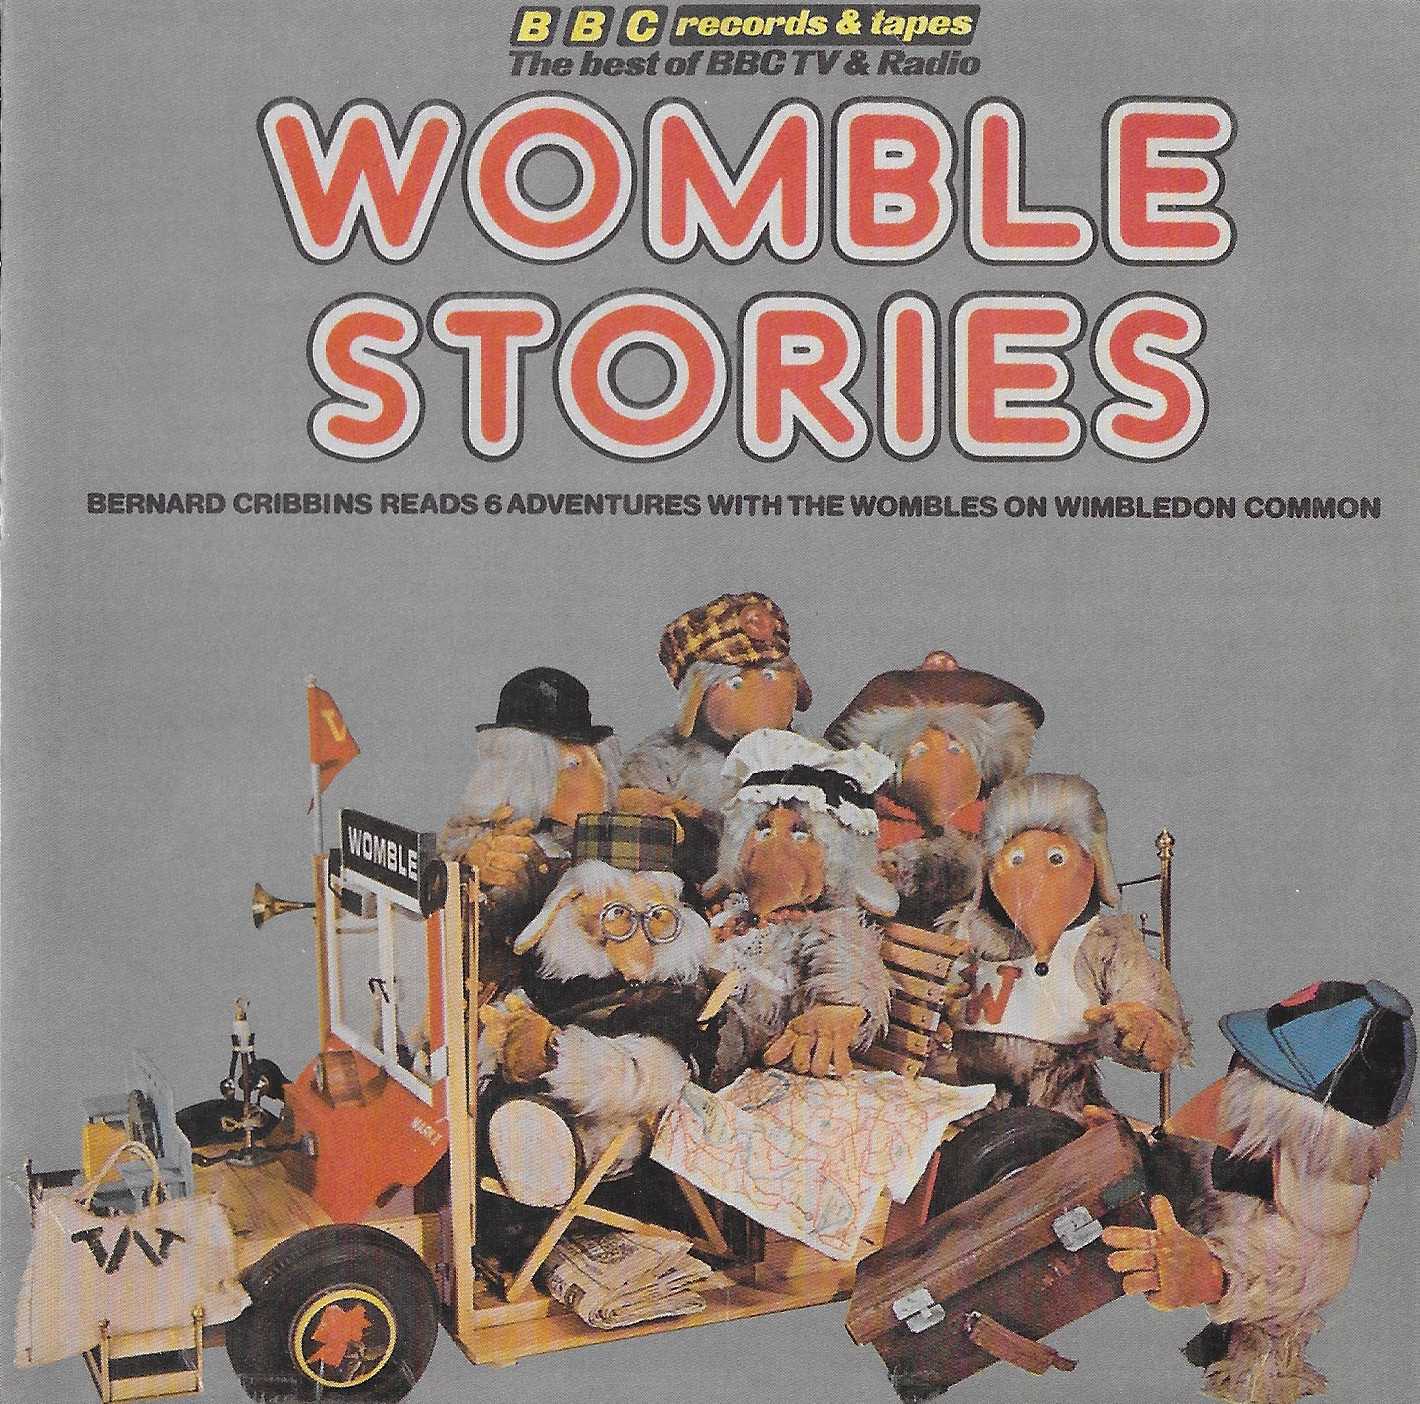 Picture of Womble stories by artist Bernard Cribbins from the BBC cds - Records and Tapes library